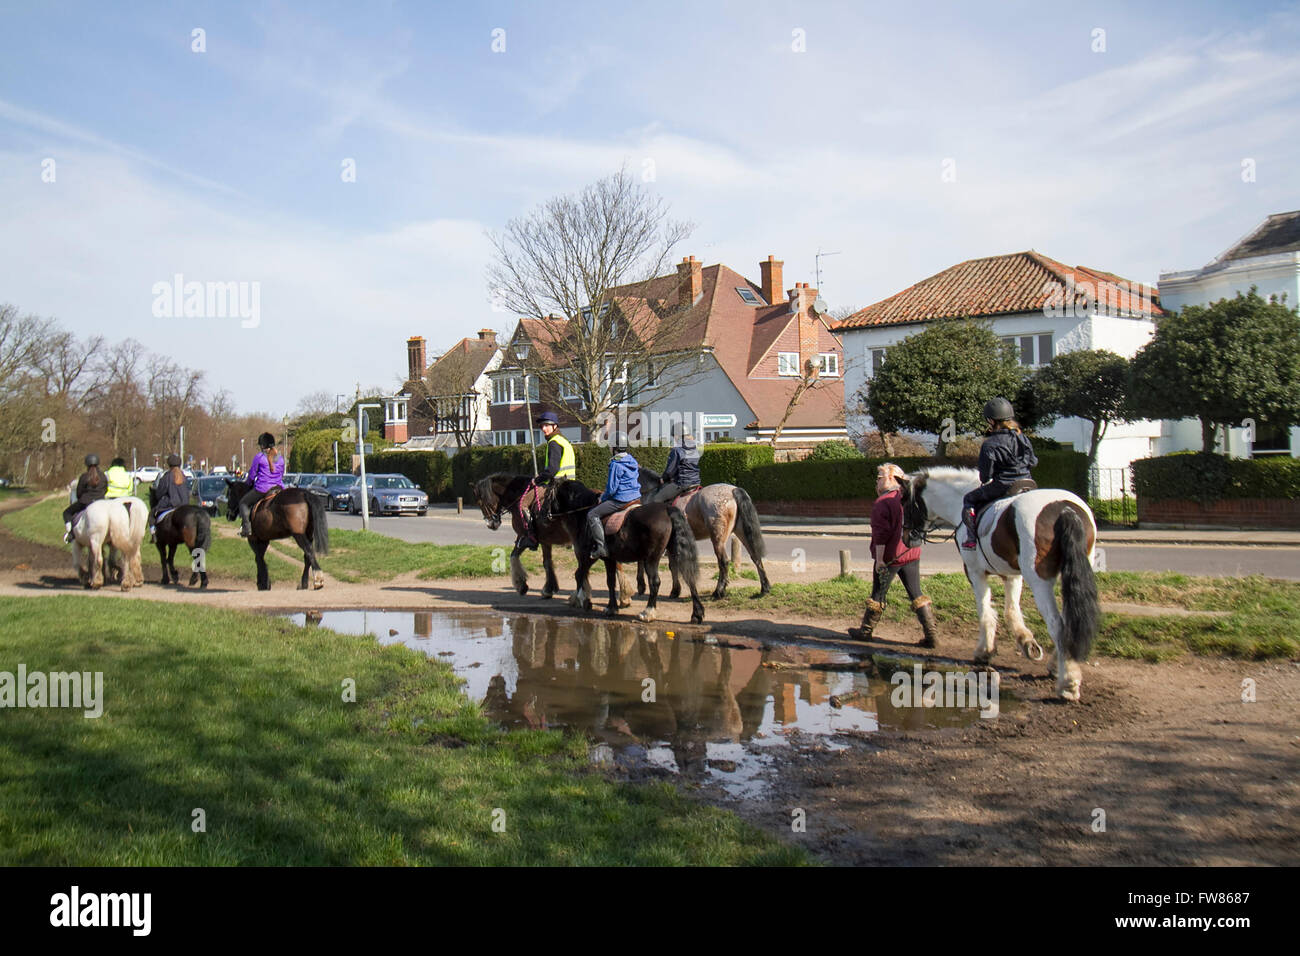 Wimbledon London, UK. 1st April 2016. UK Weather: A group of horse riders form a riding school enjoy the spring sunshine on Wimbledon Common as temperatures are forecast to rise Credit:  amer ghazzal/Alamy Live News Stock Photo